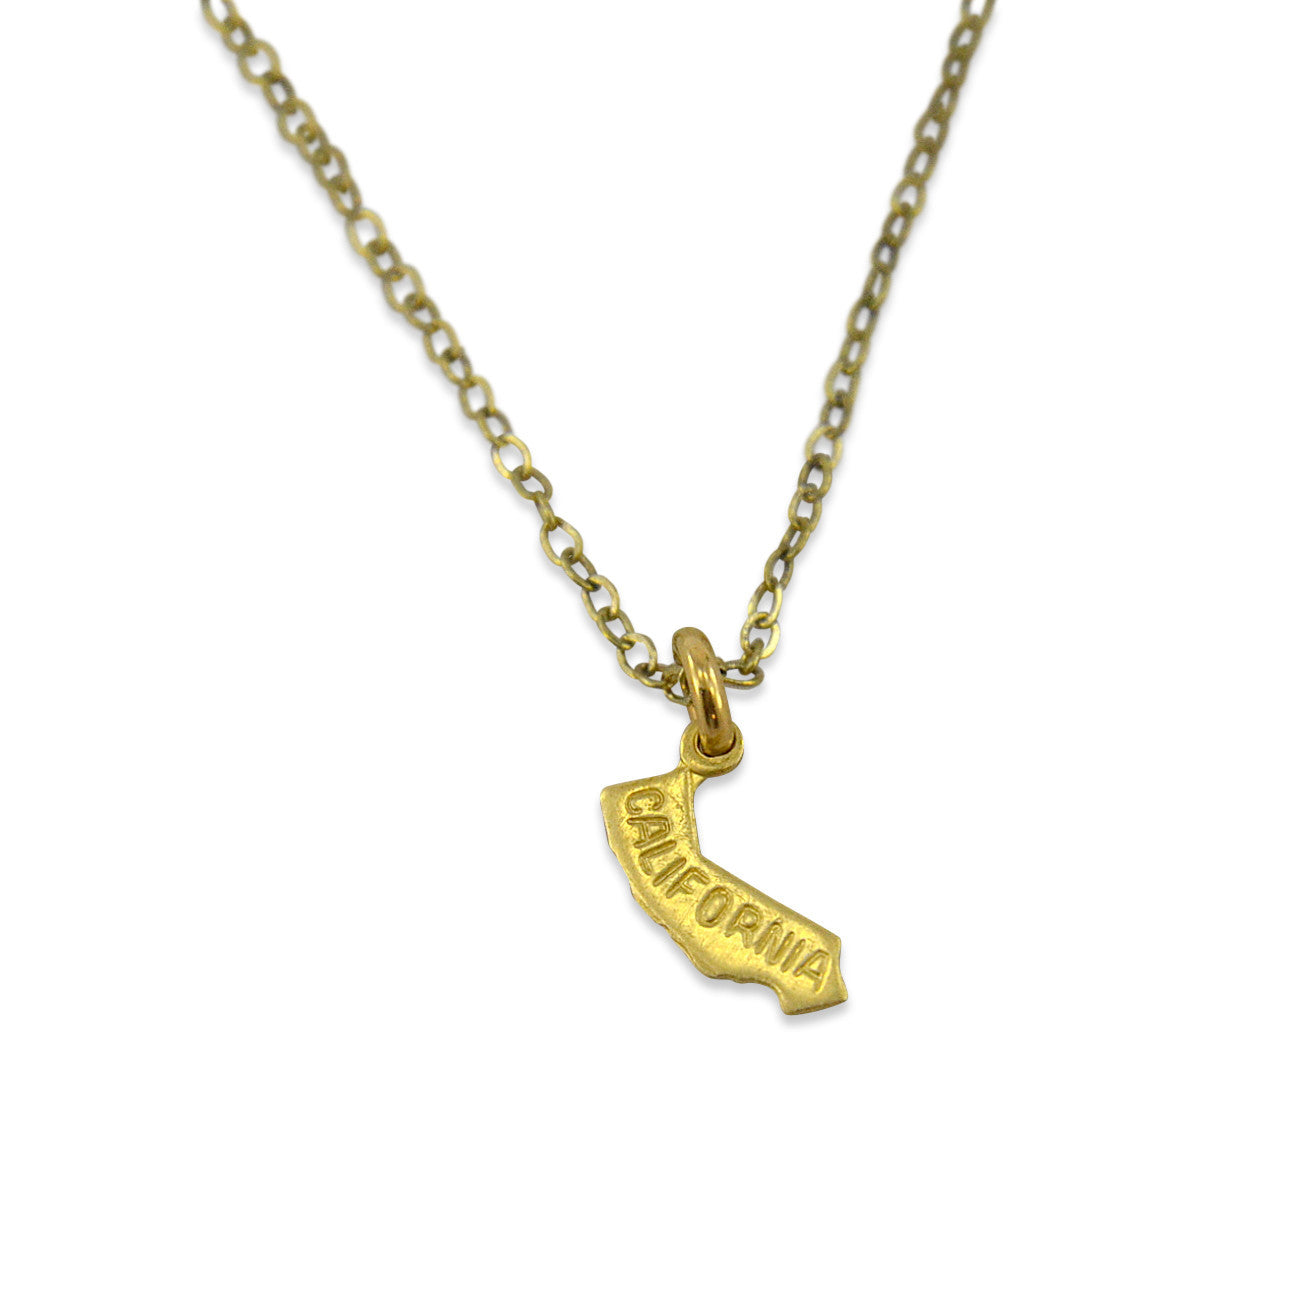 Small Gold State Charm Necklace - Gwen Delicious Jewelry Designs